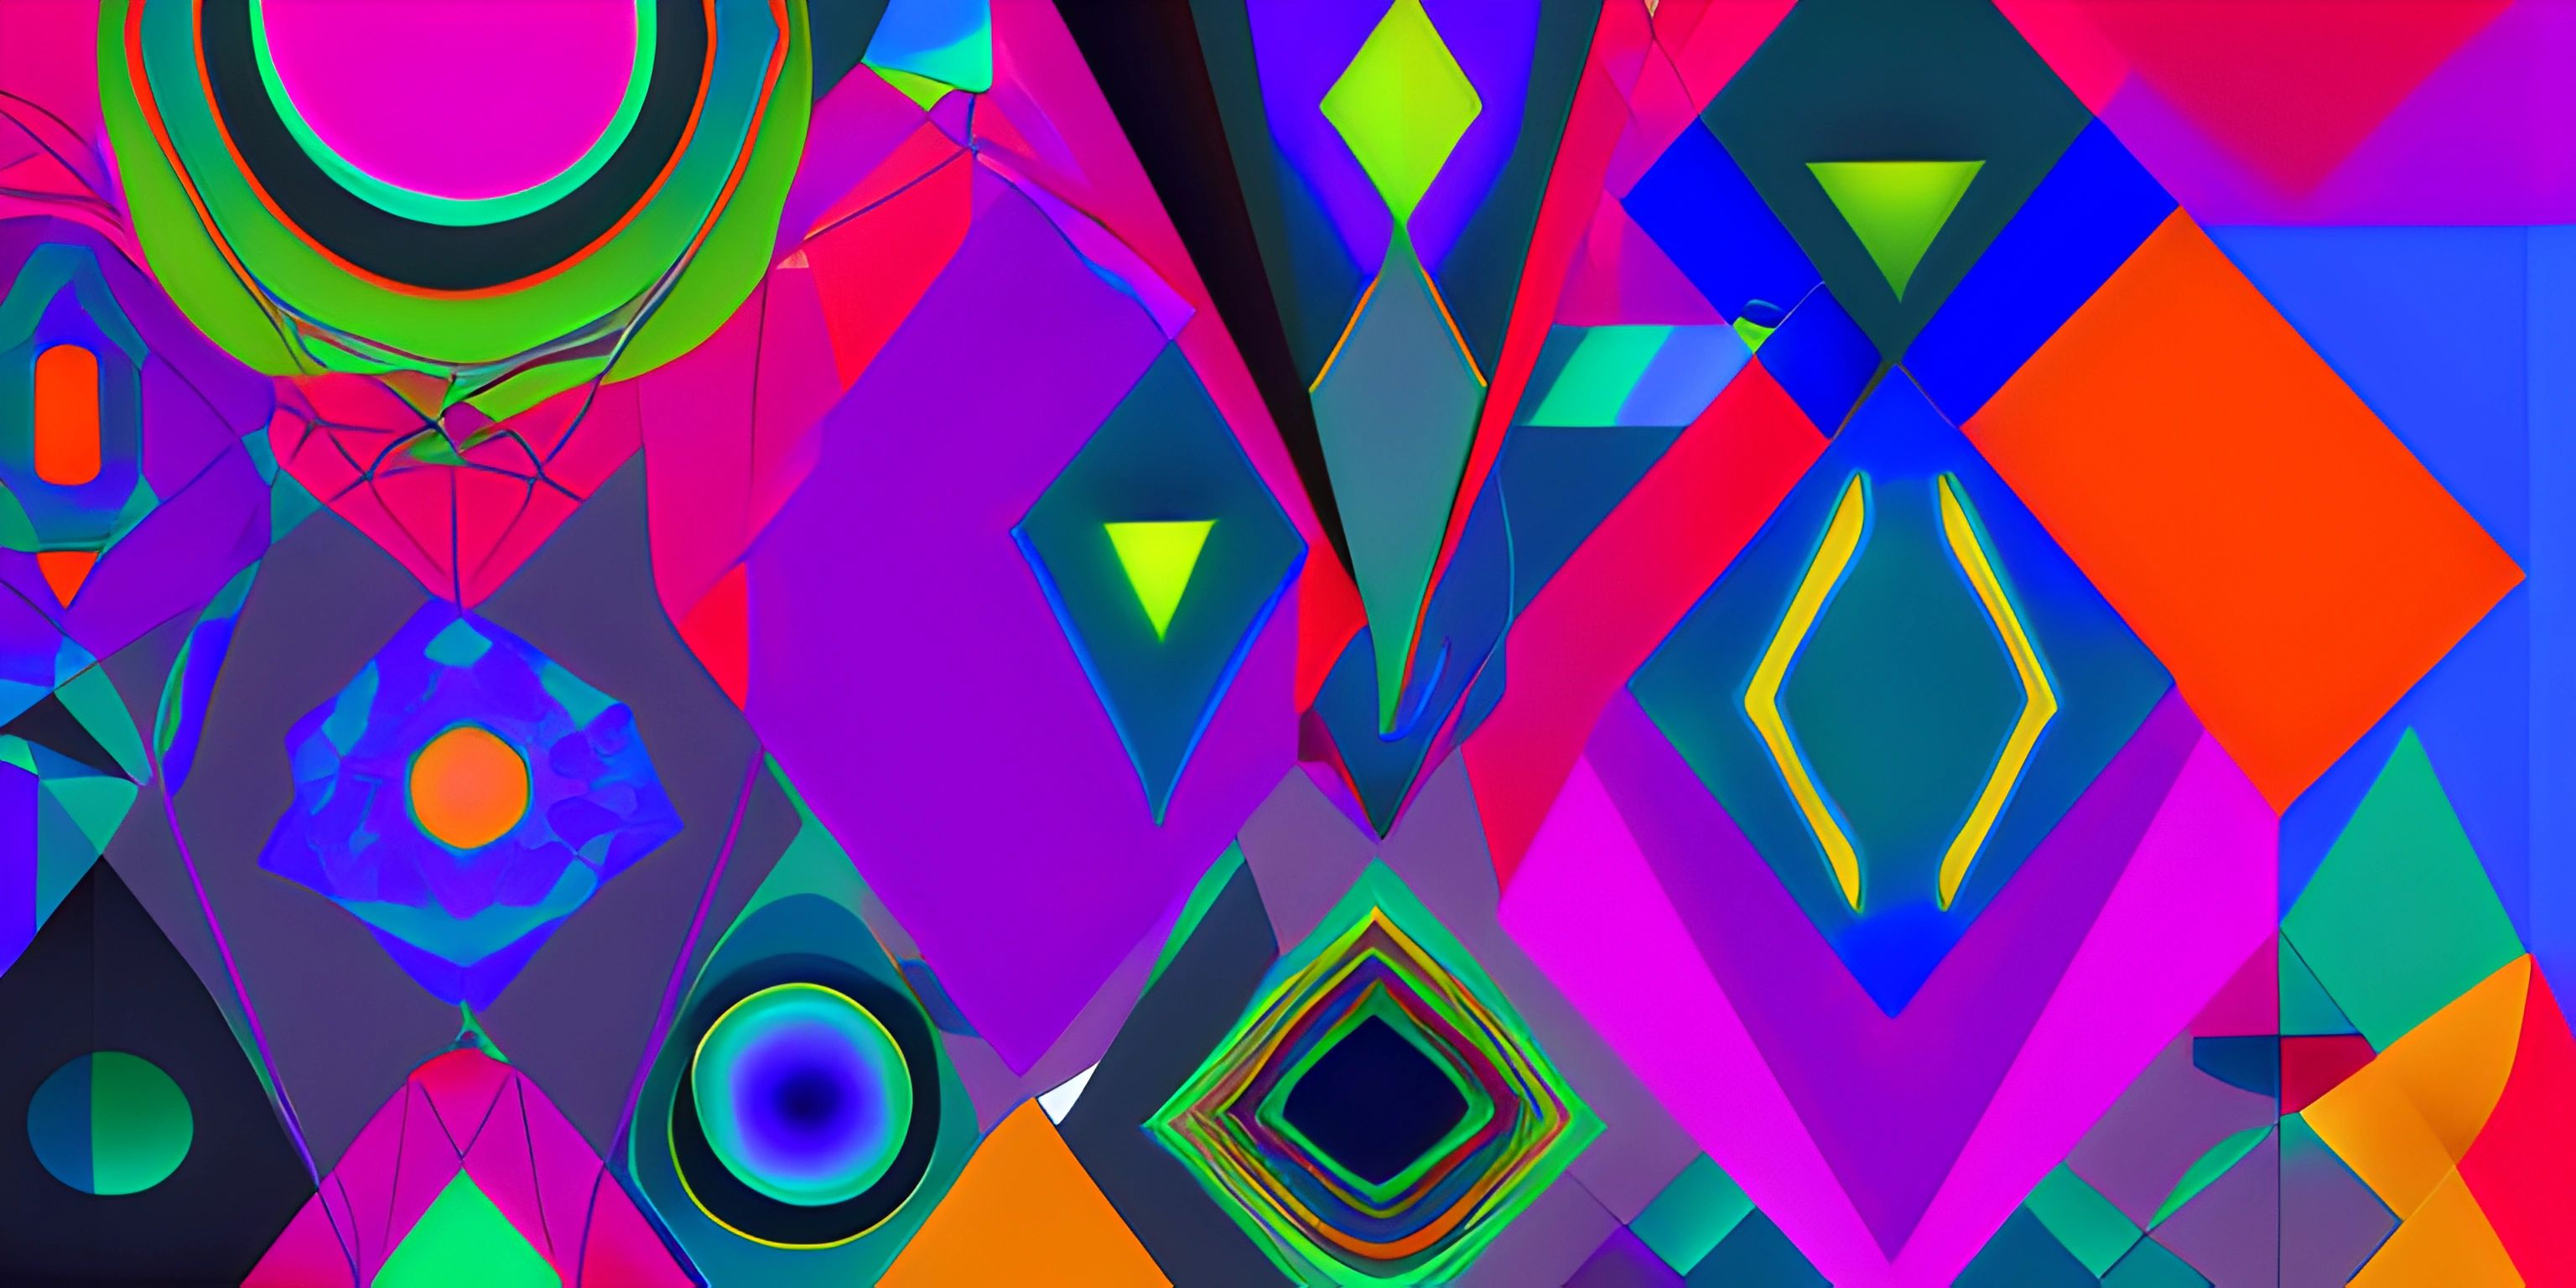 colorful abstract art background with lots of colorful shapes and colors on them, including the large square